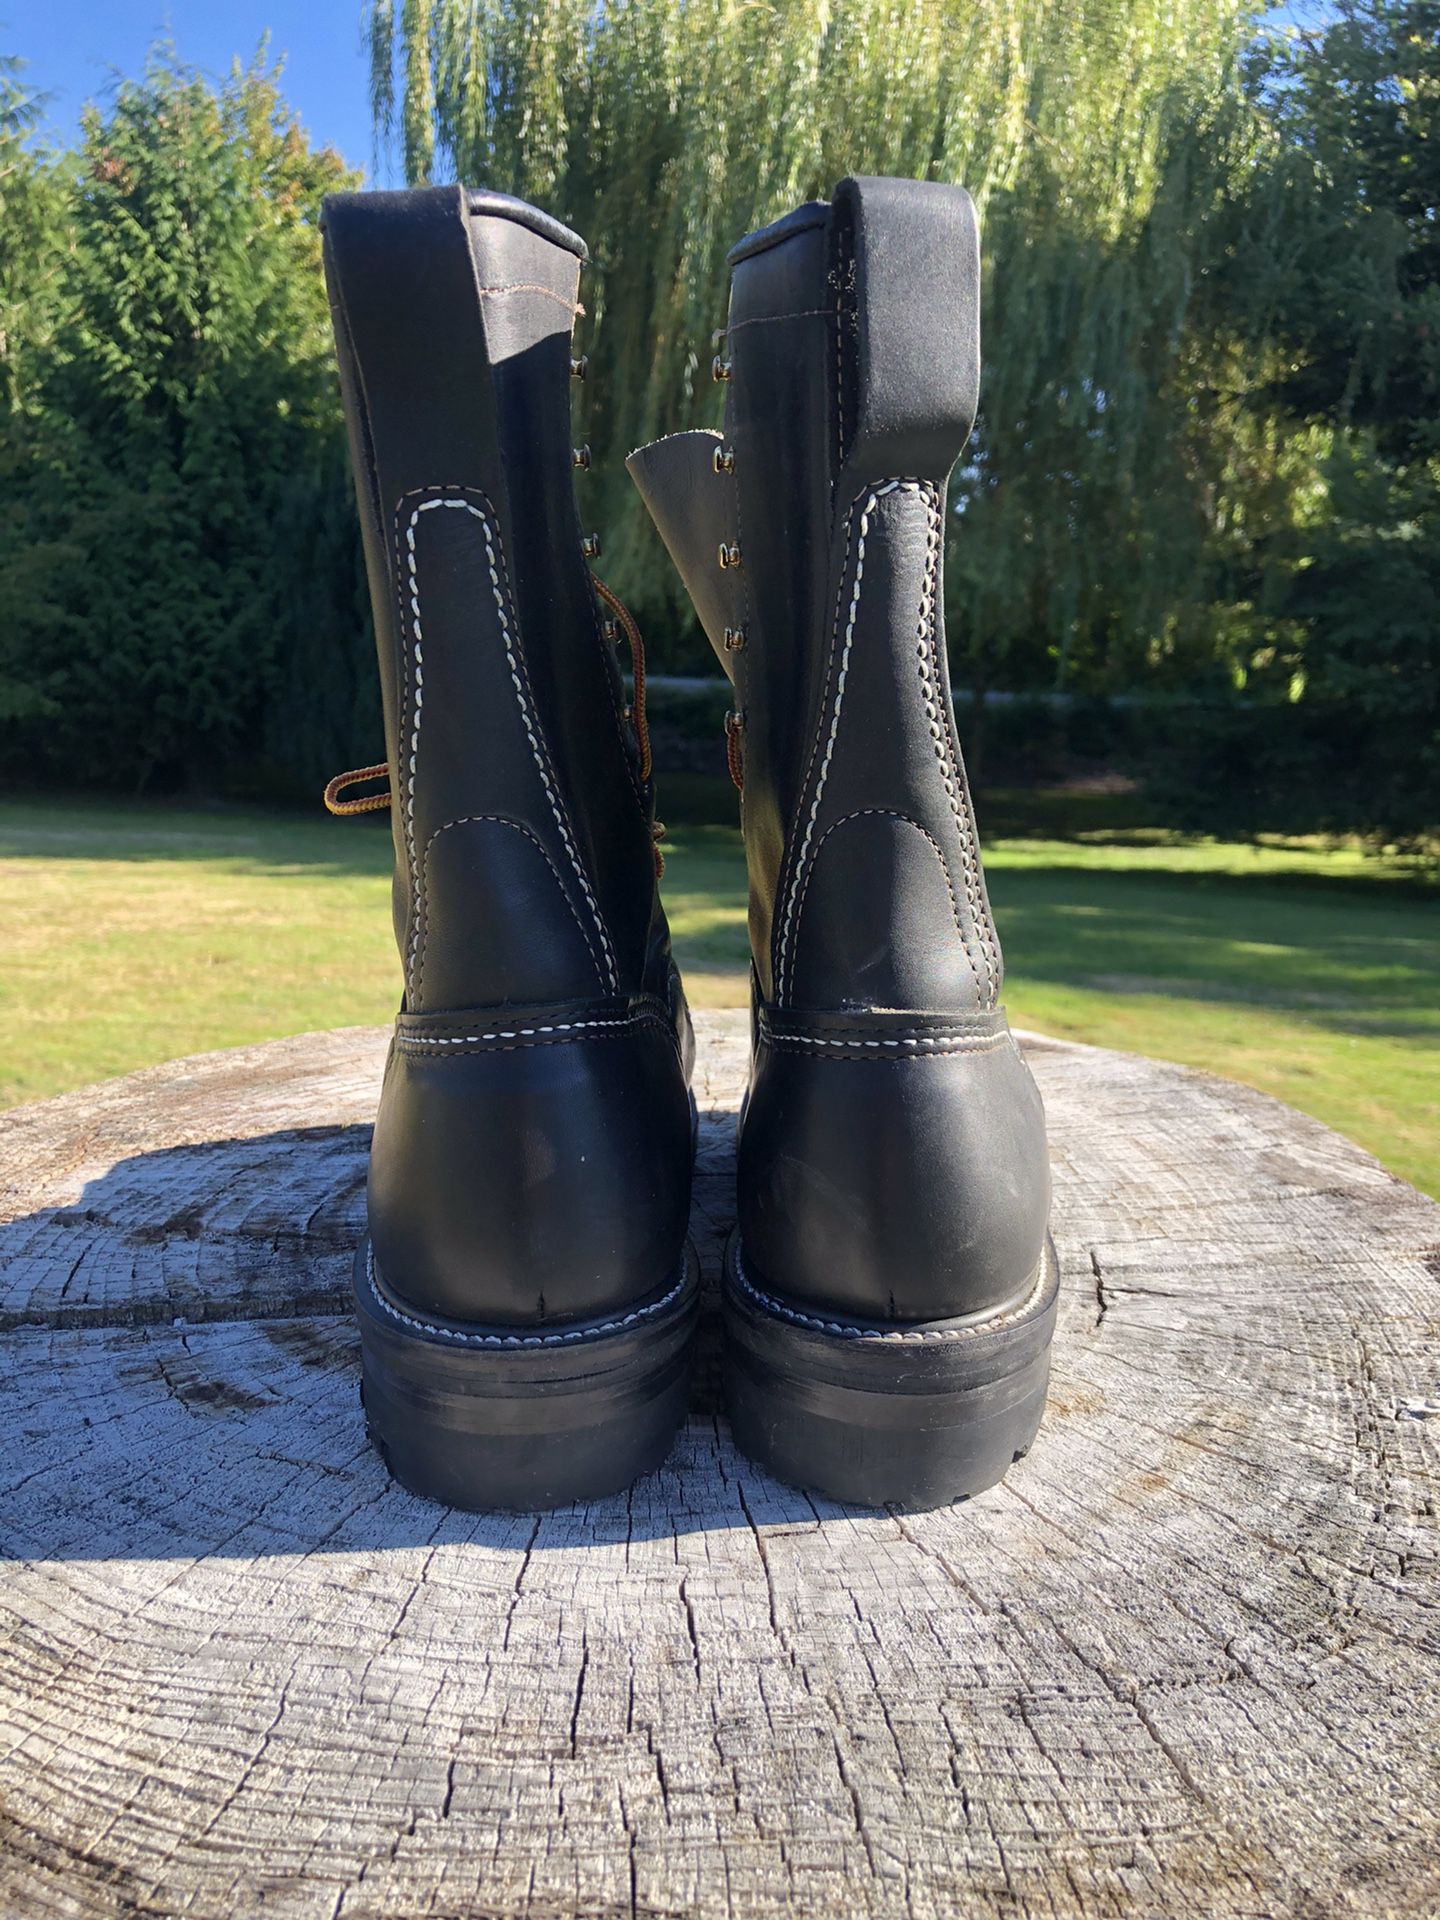 Hoffman Trooper Lineman boots for Sale in Bow, WA - OfferUp